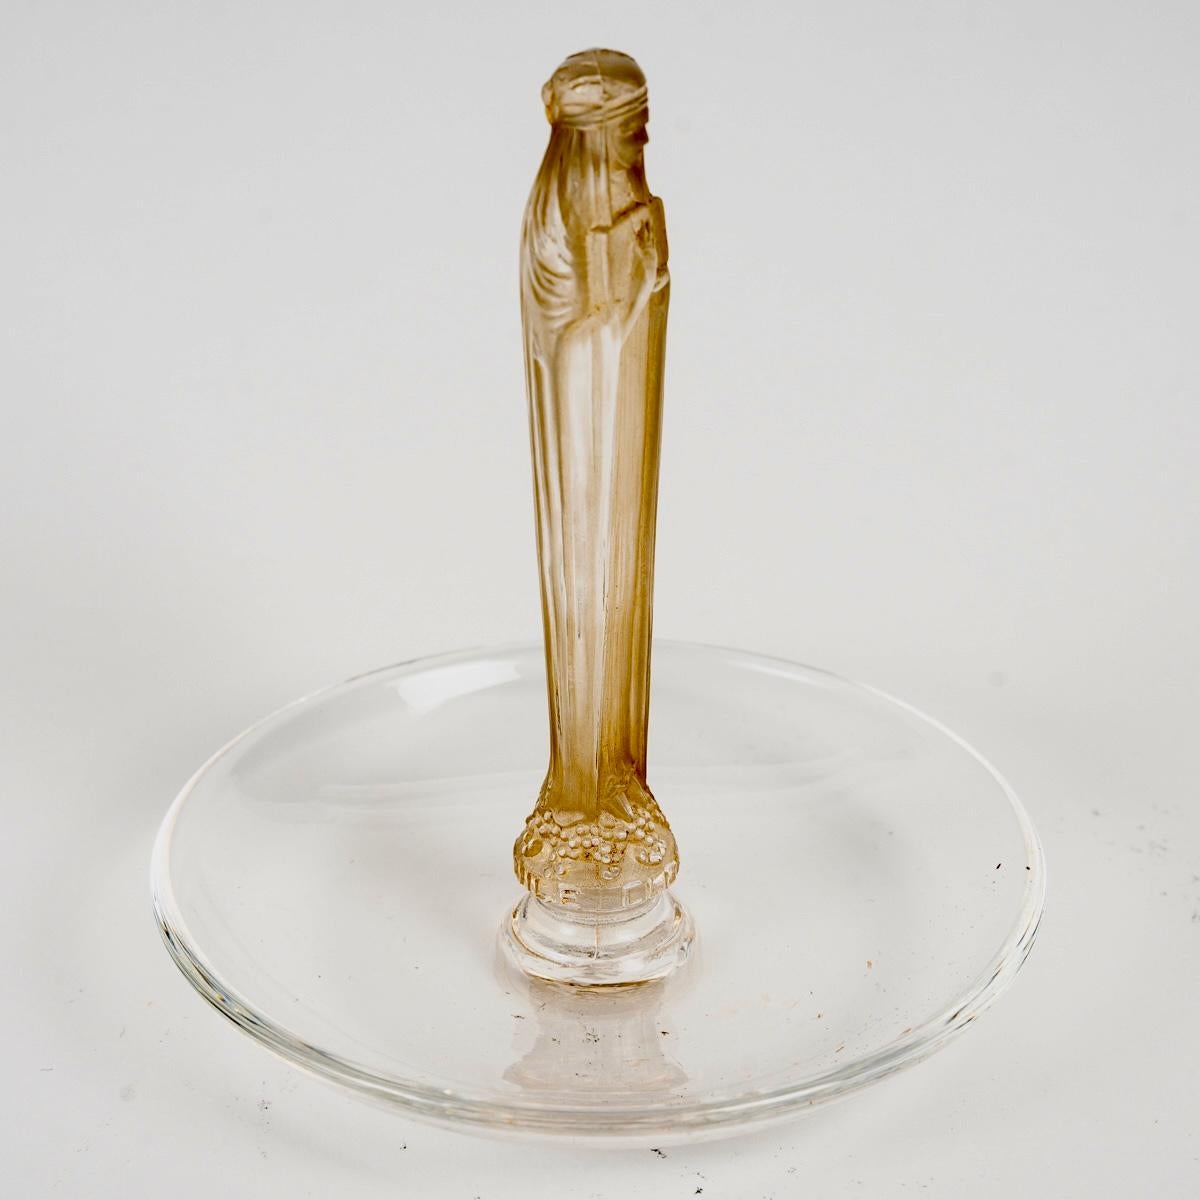 Molded 1925 René Lalique Asthray Pintray Clos Sainte Odile Glass with Sepia Patina For Sale